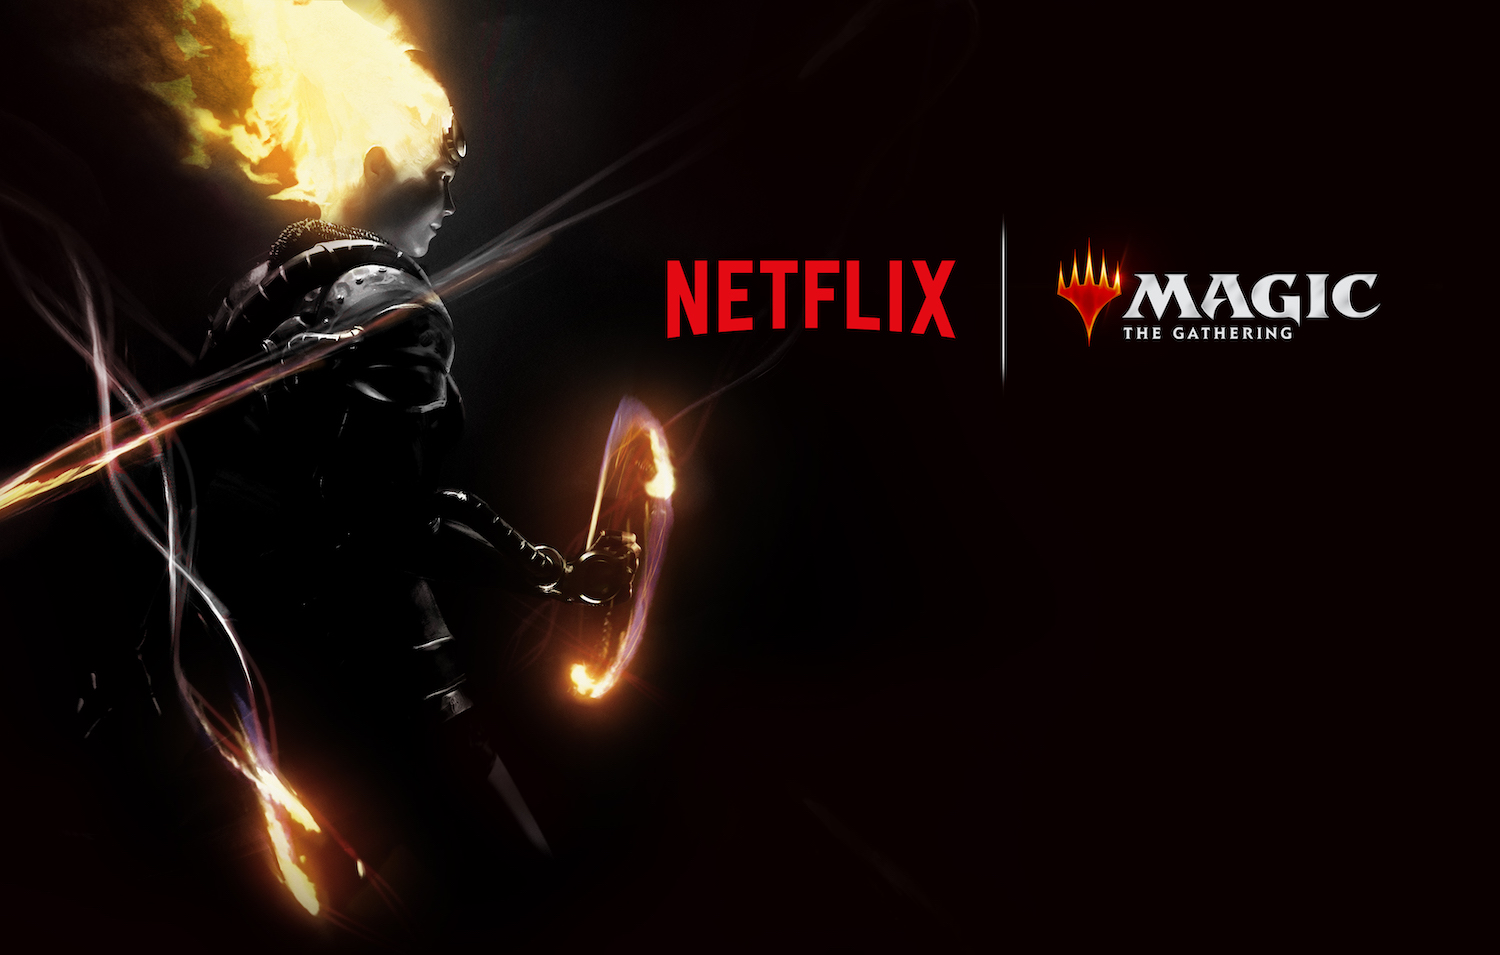 A 'Magic: The Gathering' animated series is coming to Netflix